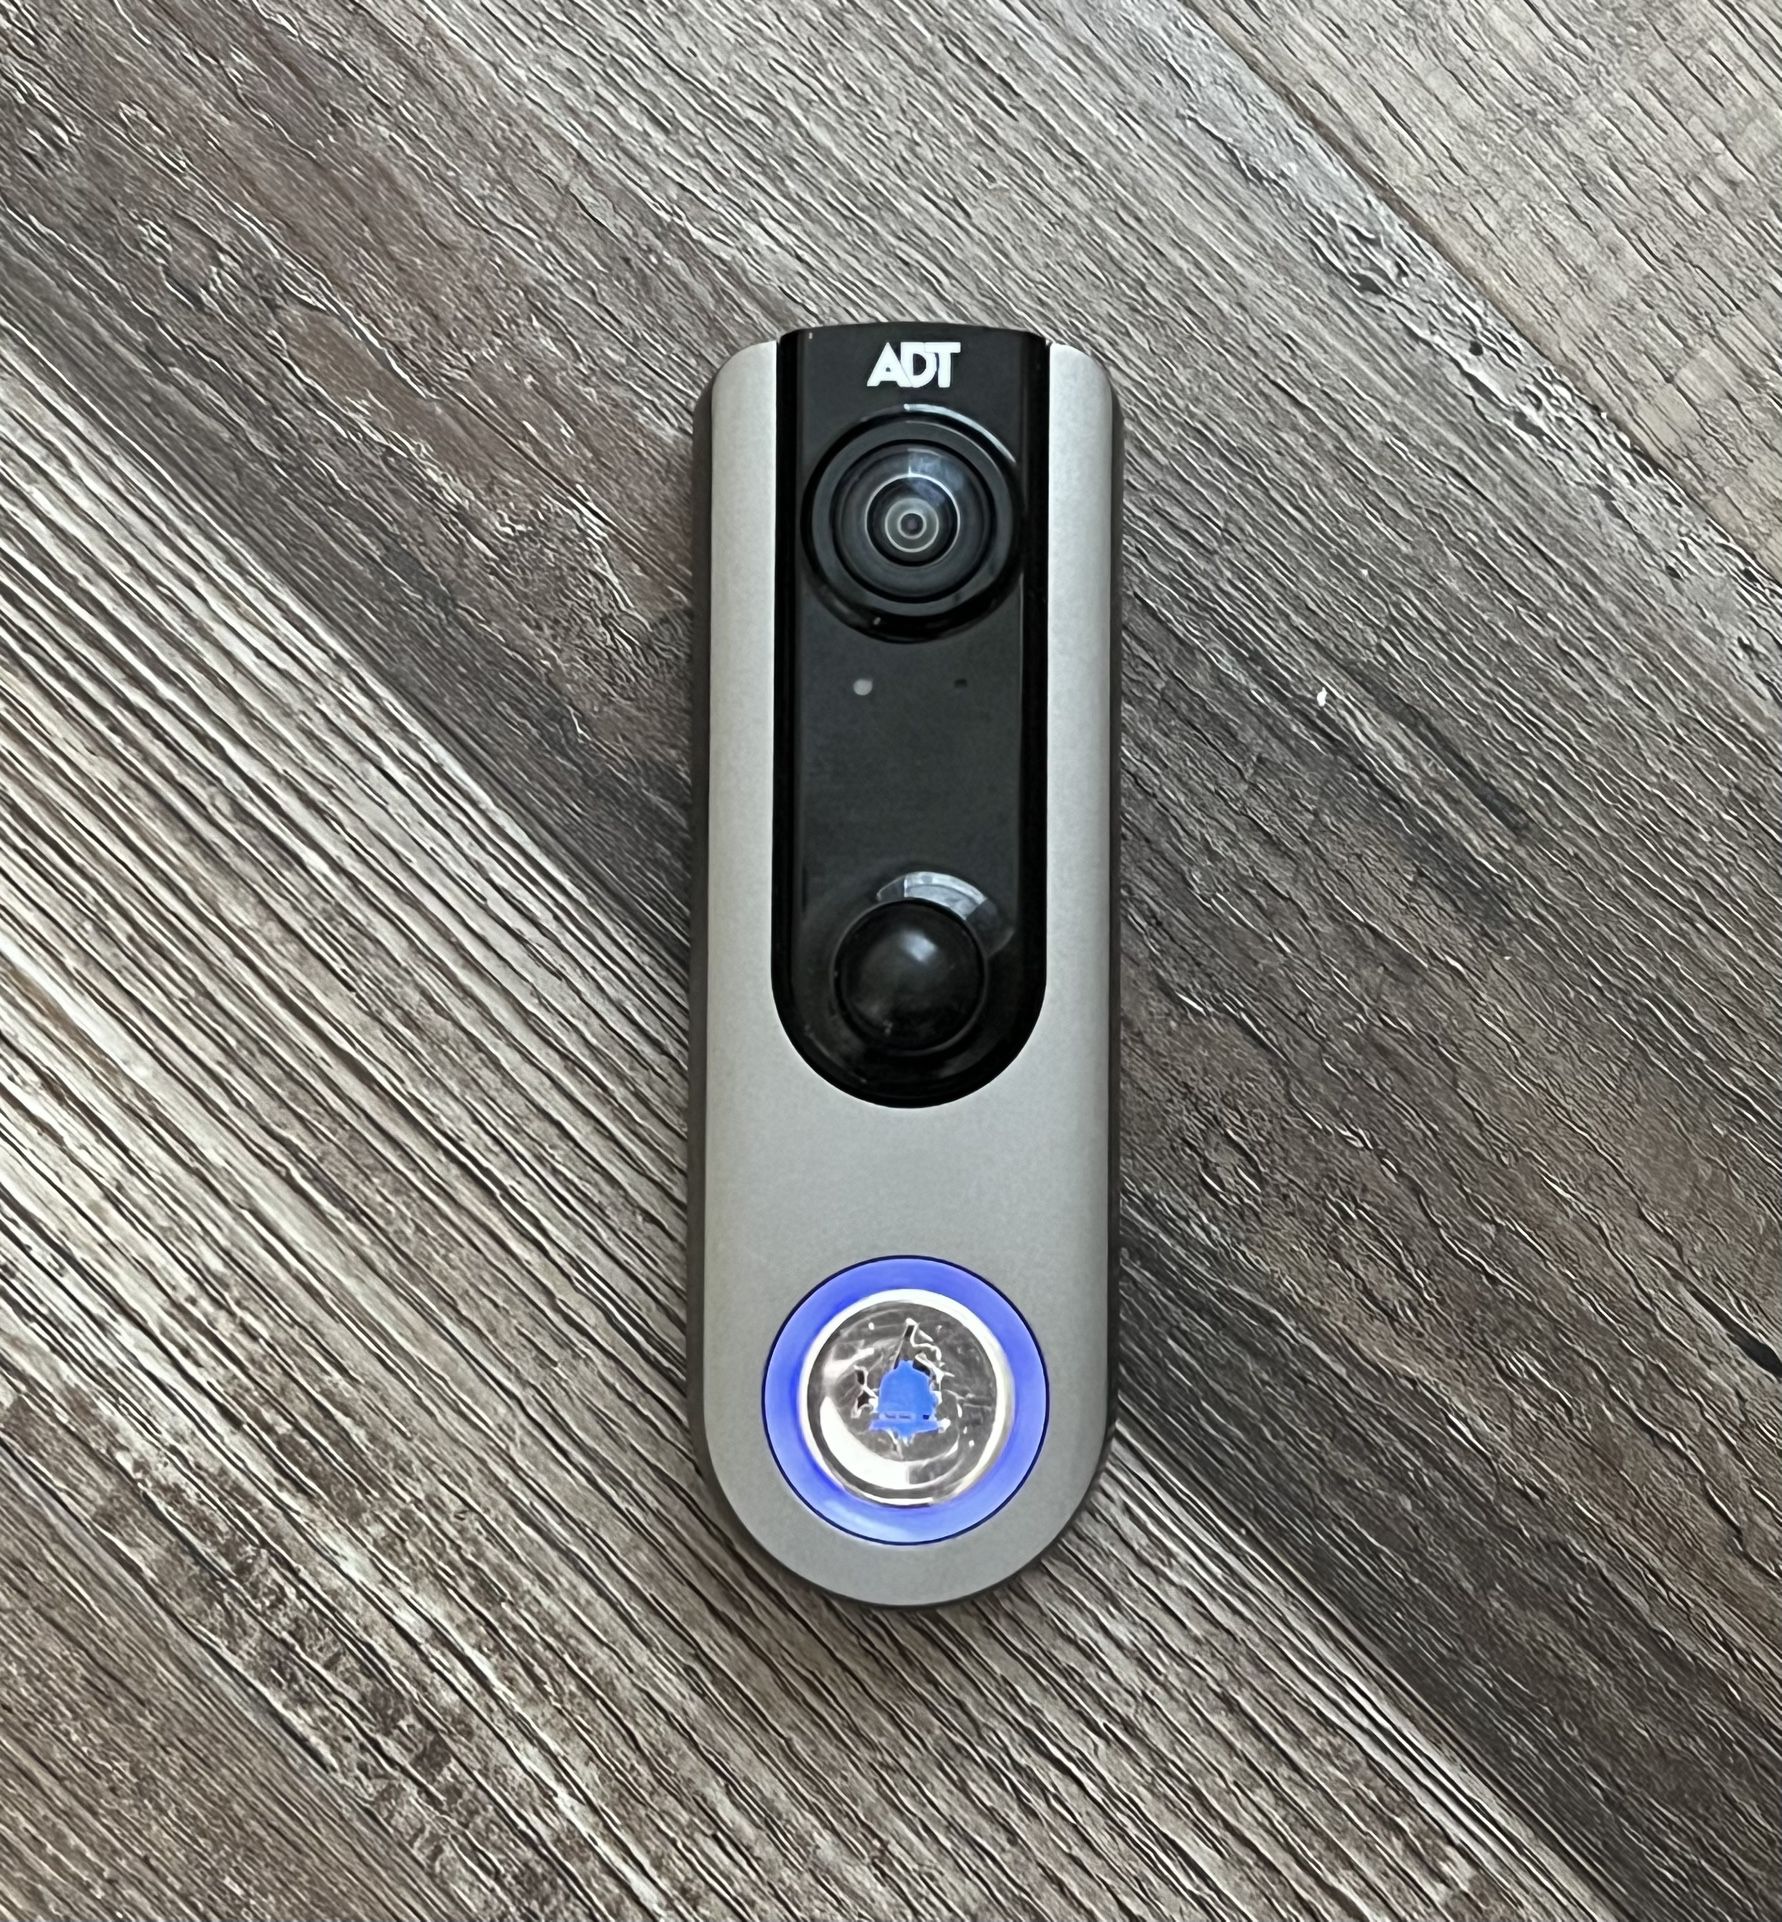 ADT Doorbell With A Camera